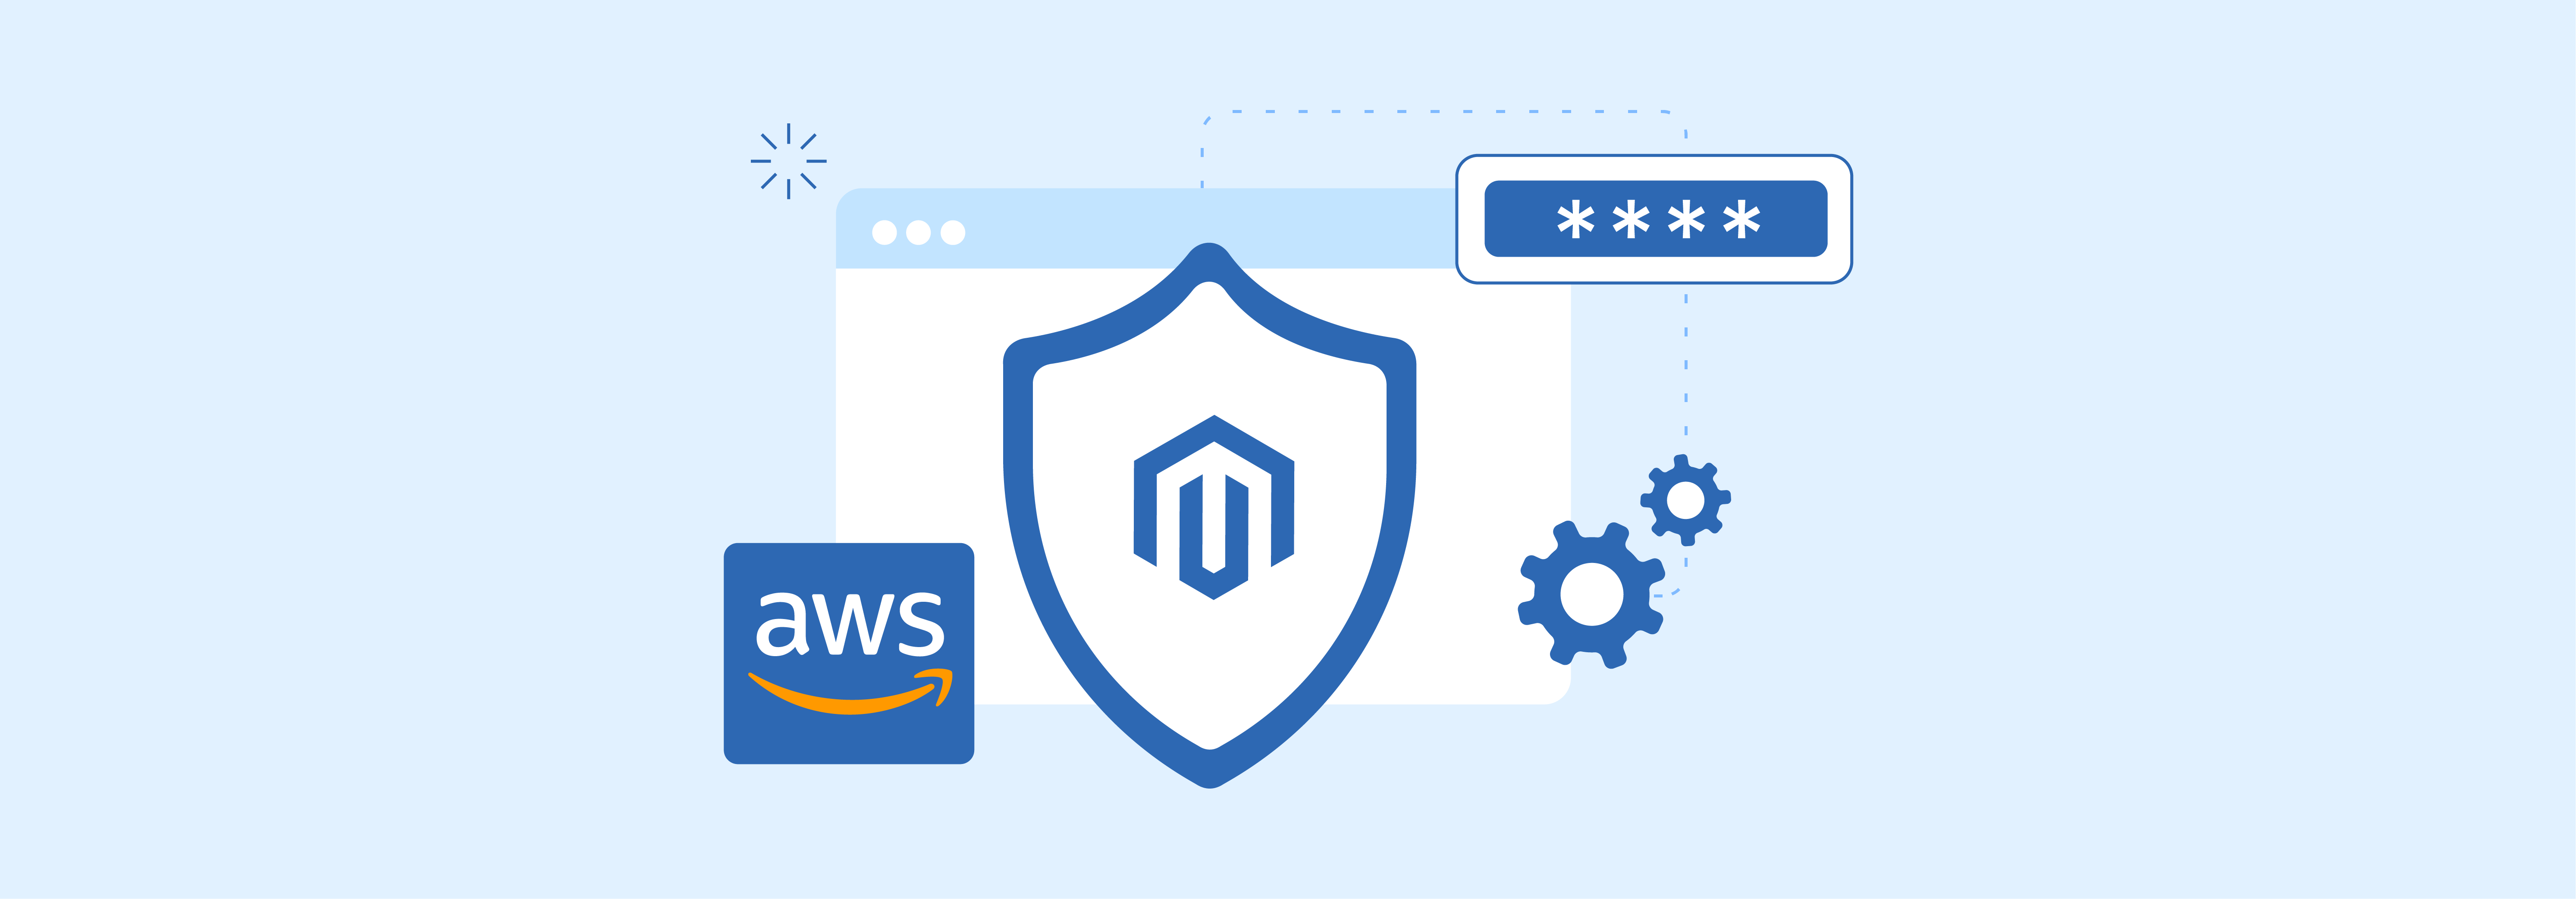 Magento Hosting AWS Security Practices